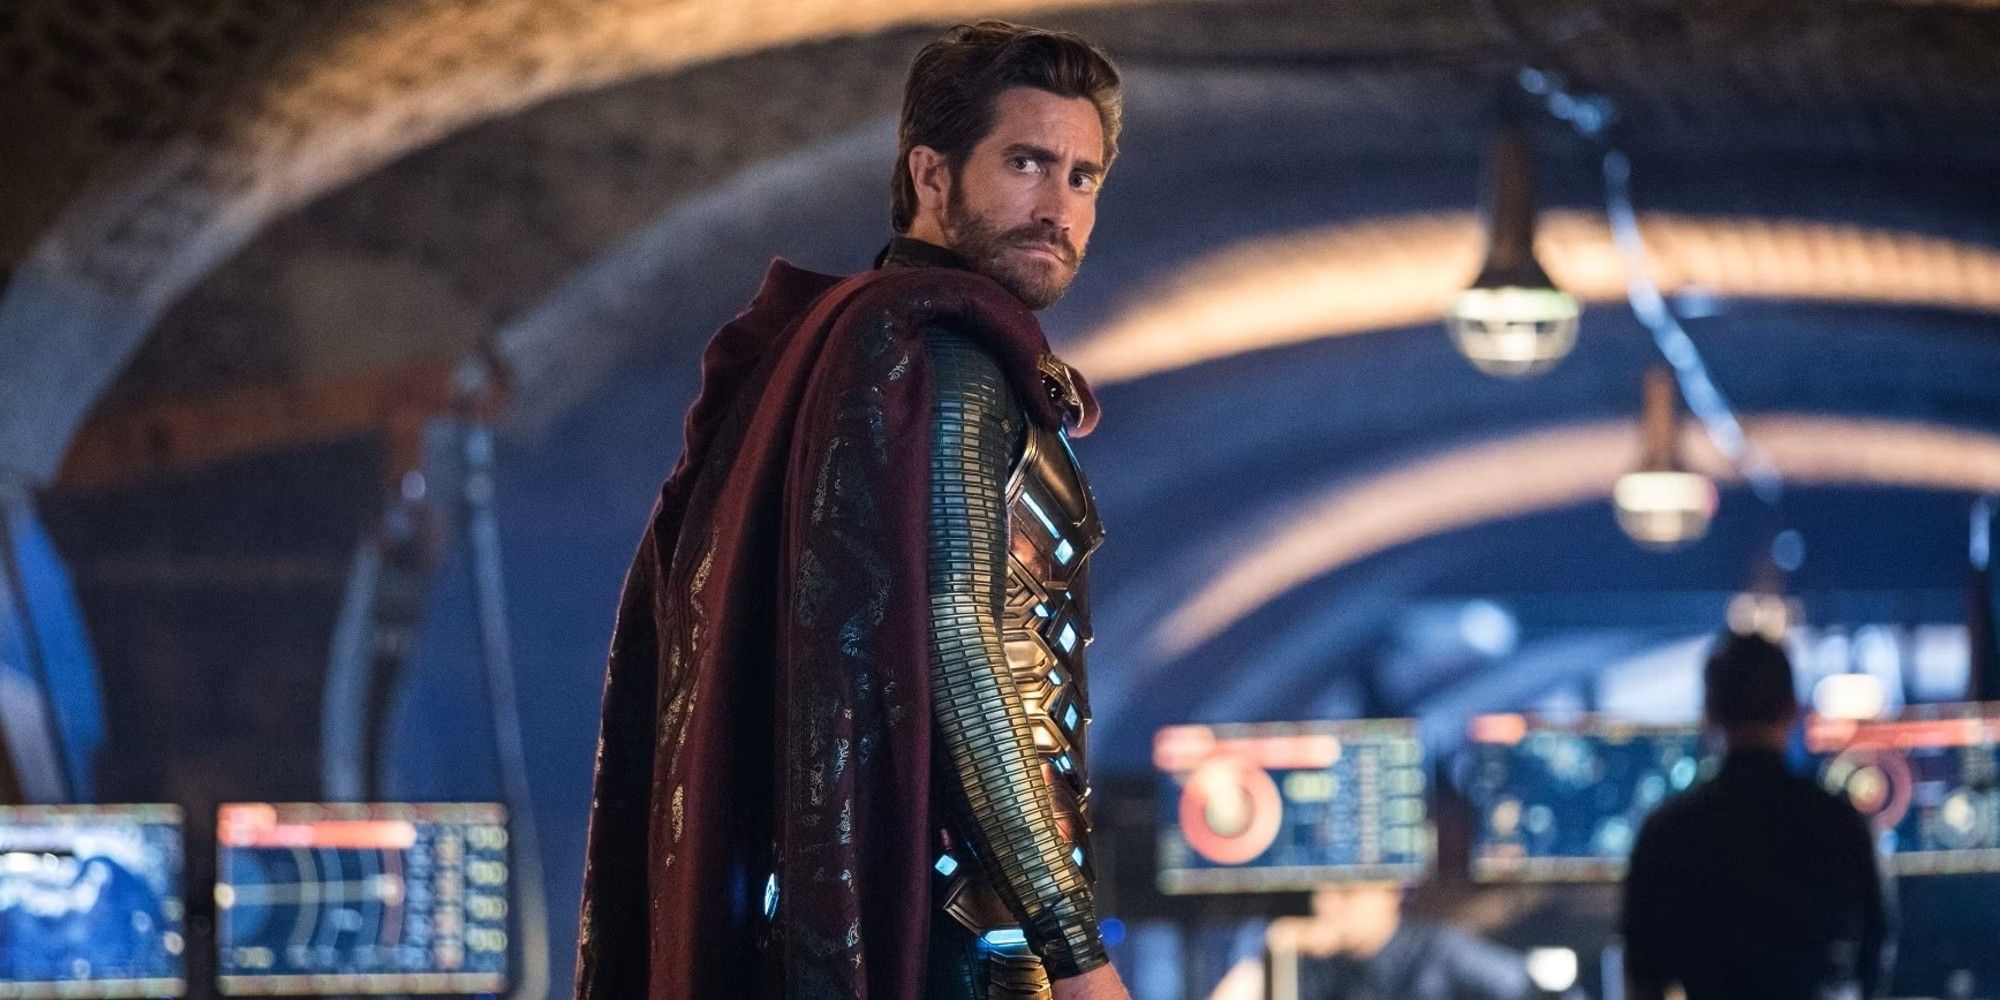 Mysterio Portrayed By Jake Gyllenhaal In Spider-Man: Far From Home